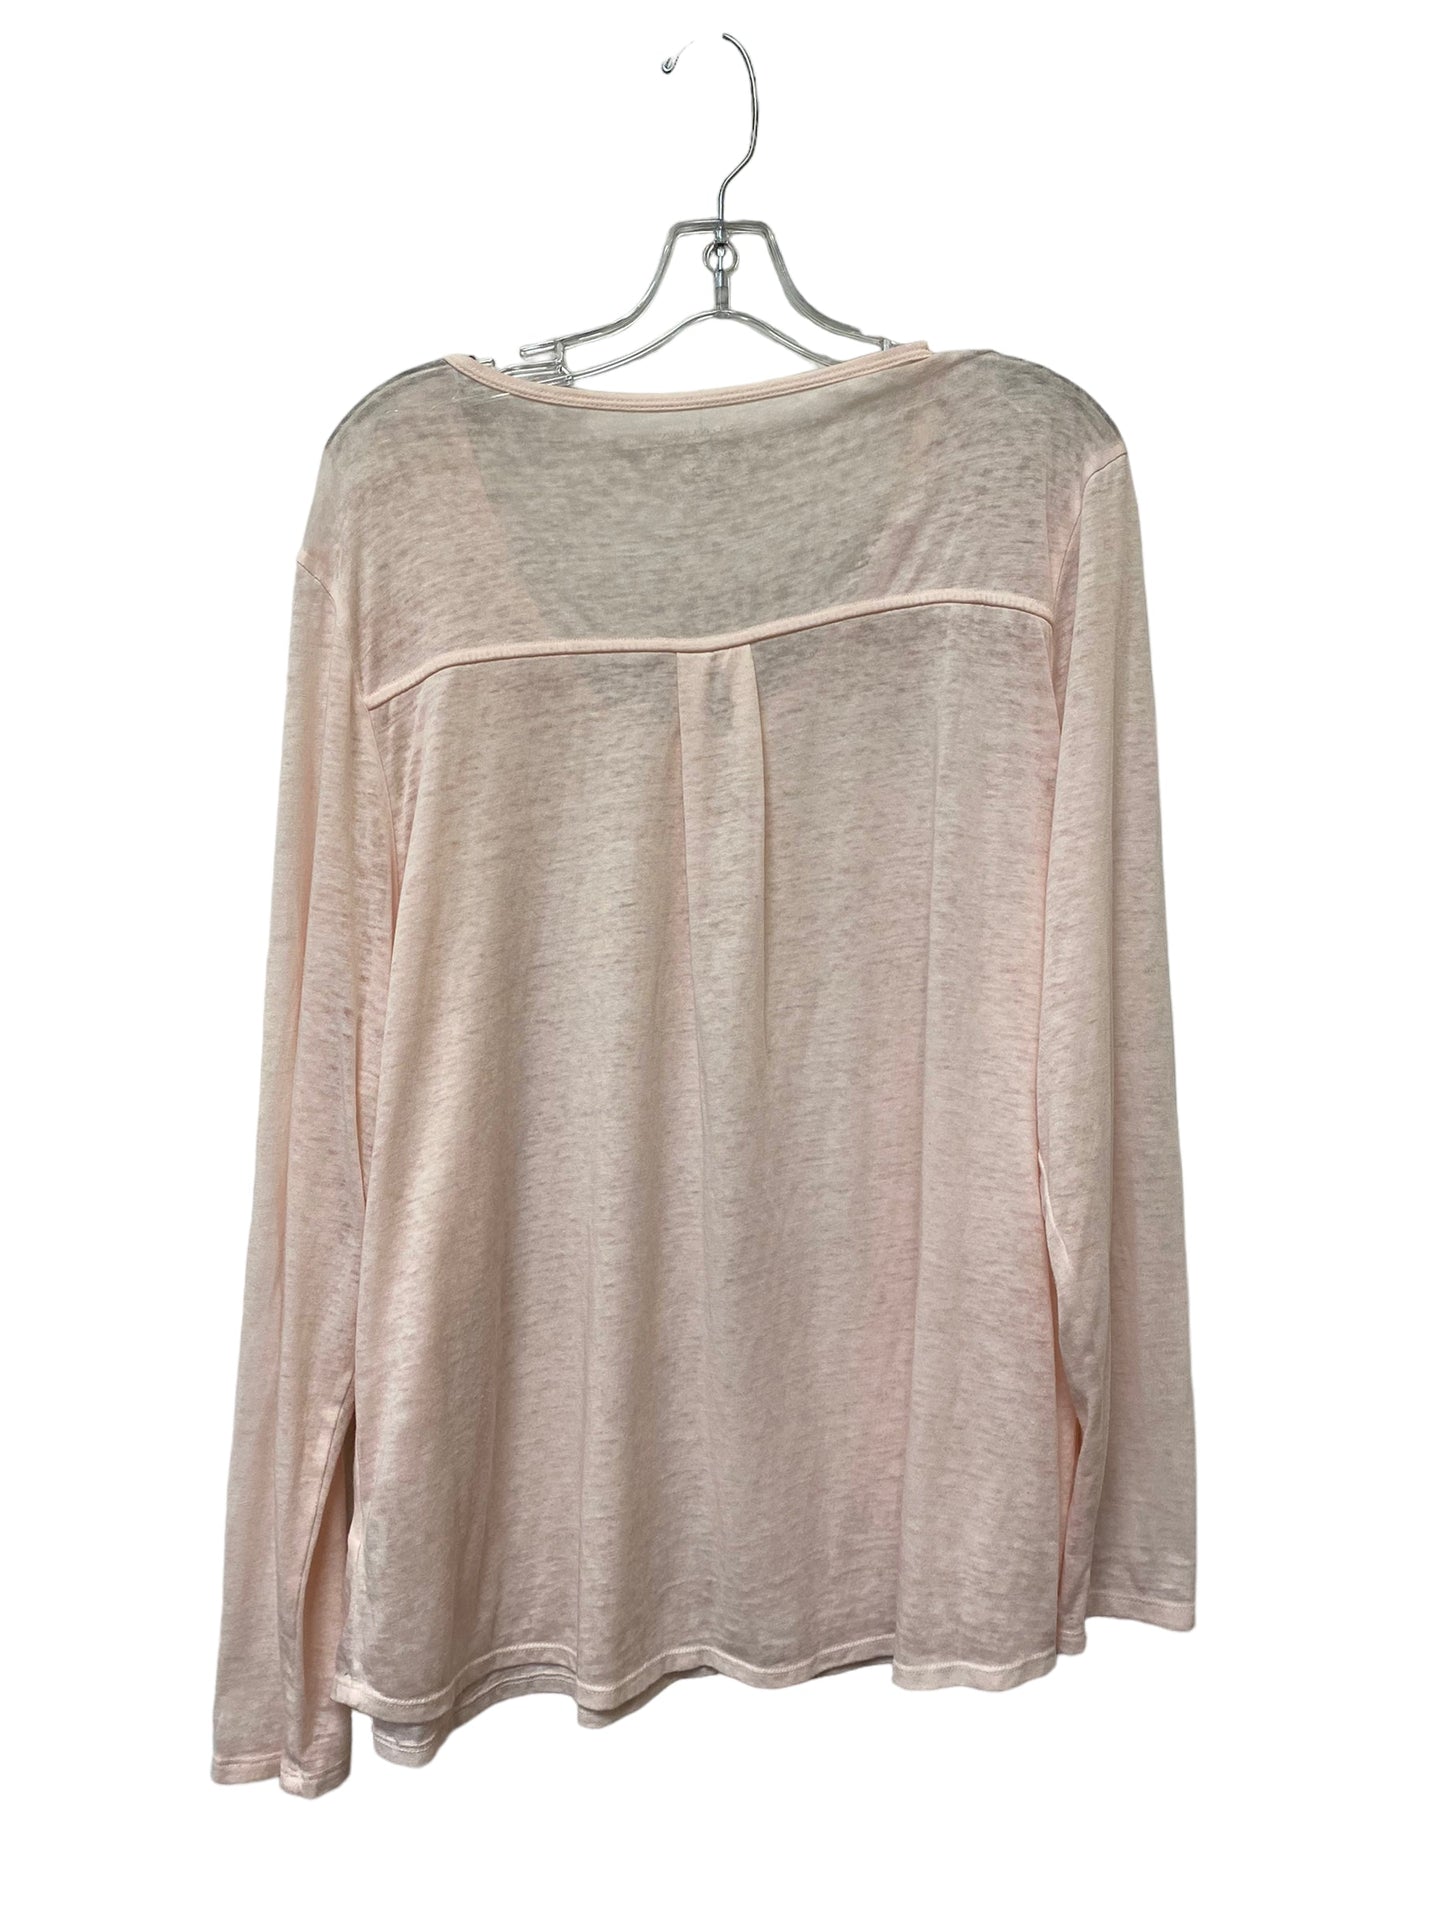 Top Long Sleeve Basic By Sonoma  Size: 2x